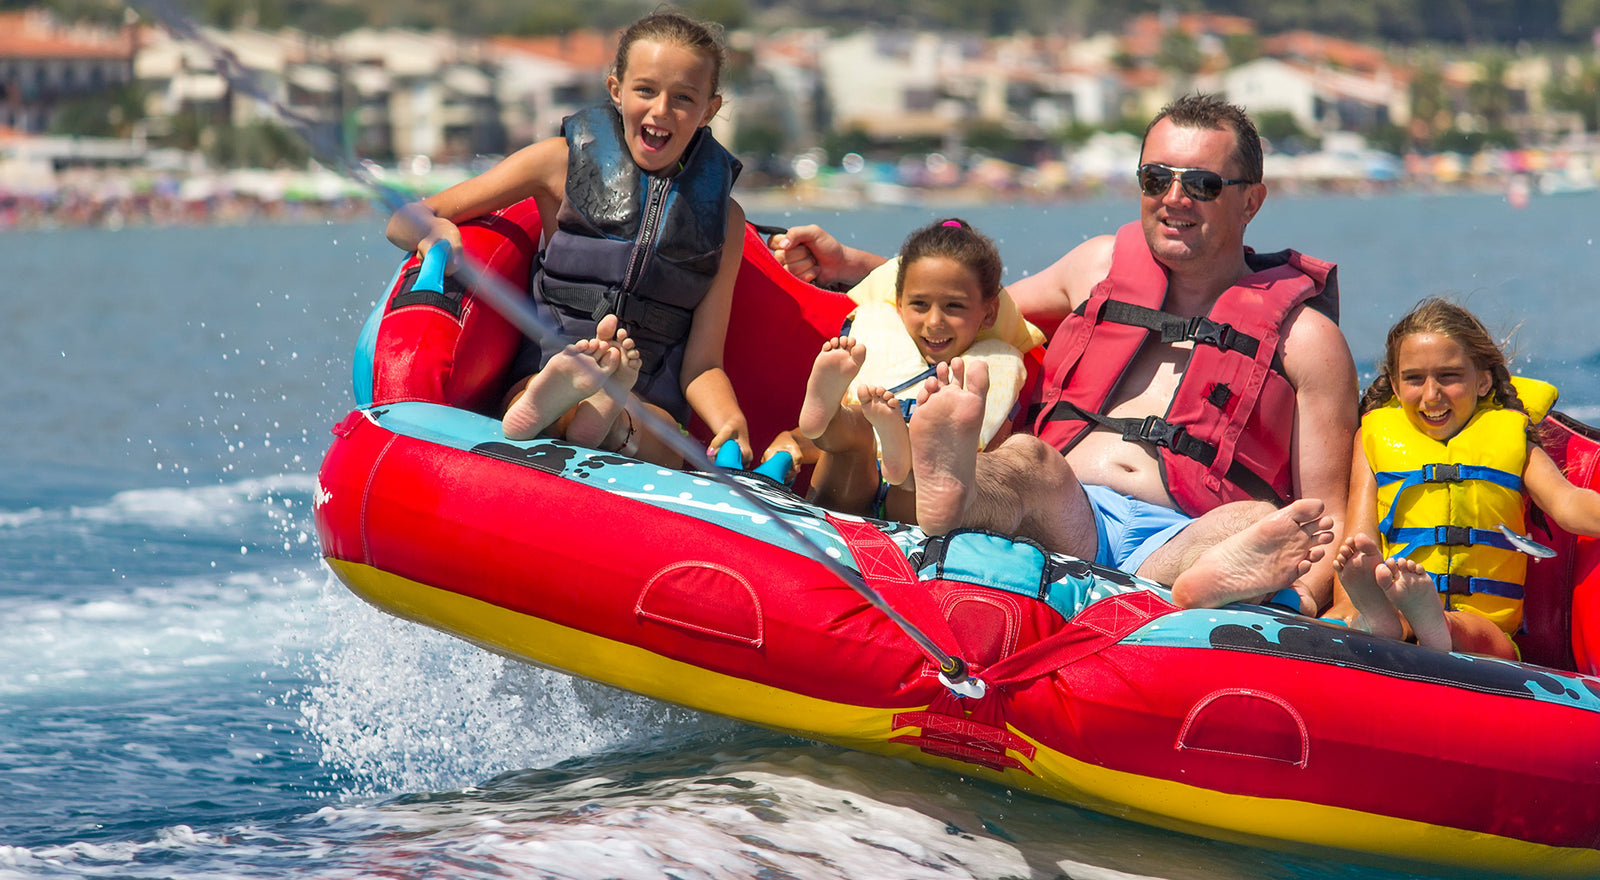 Top 16 Gift Ideas for Kids Who Love to Boat